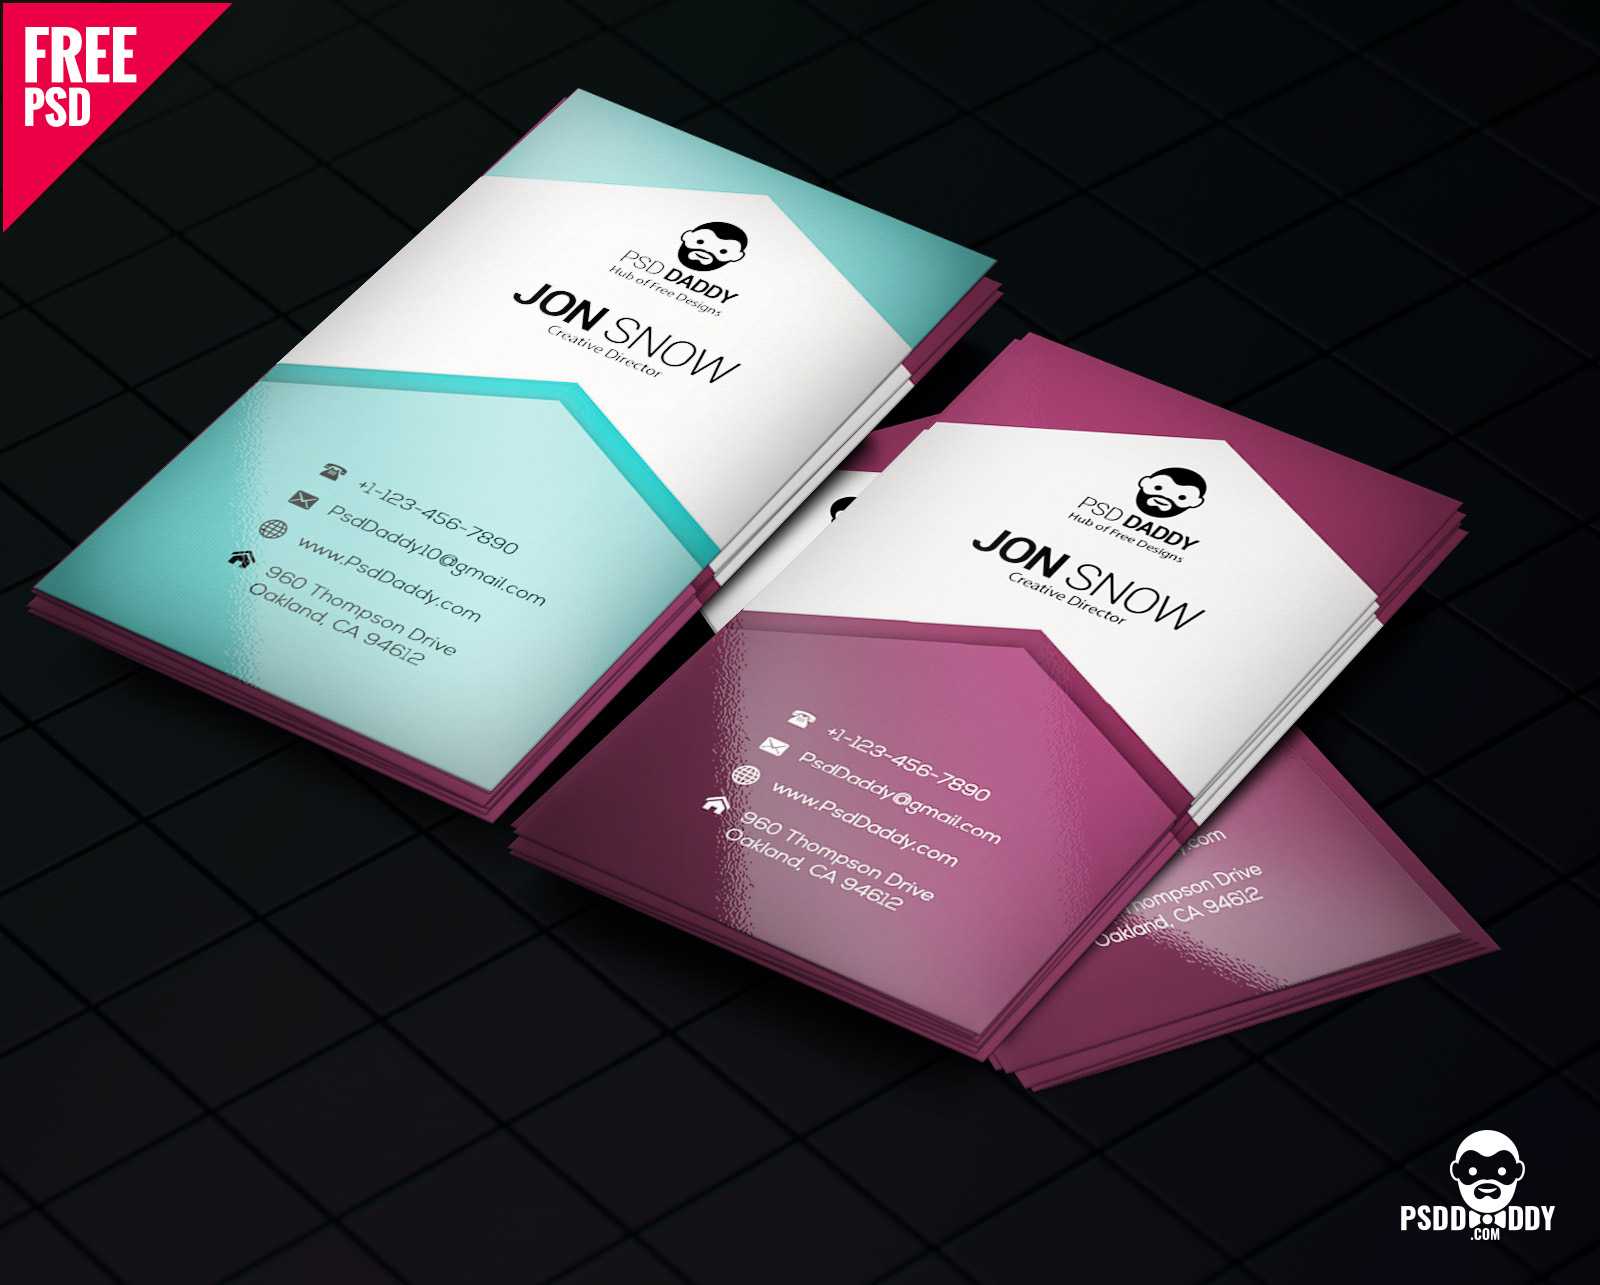 Download]Creative Business Card Psd Free | Psddaddy Throughout Free Psd Visiting Card Templates Download